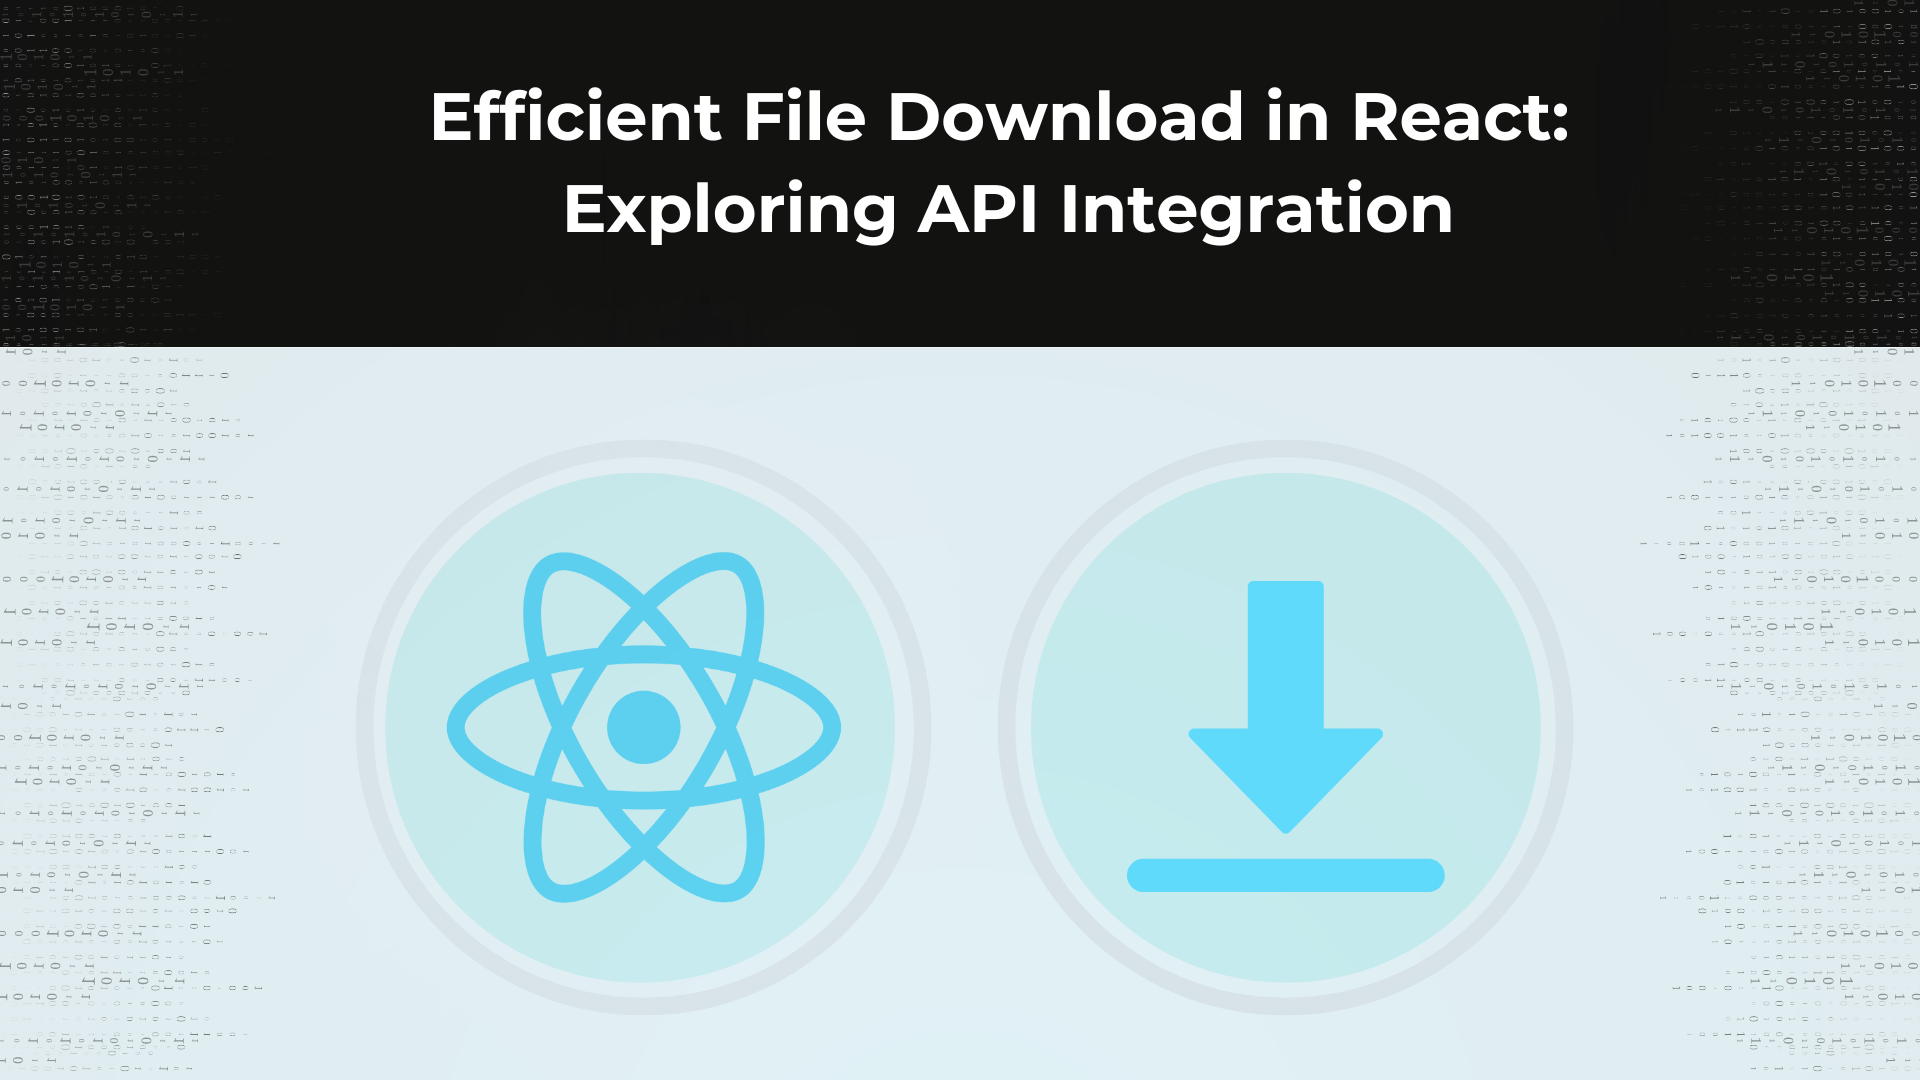 File download in React